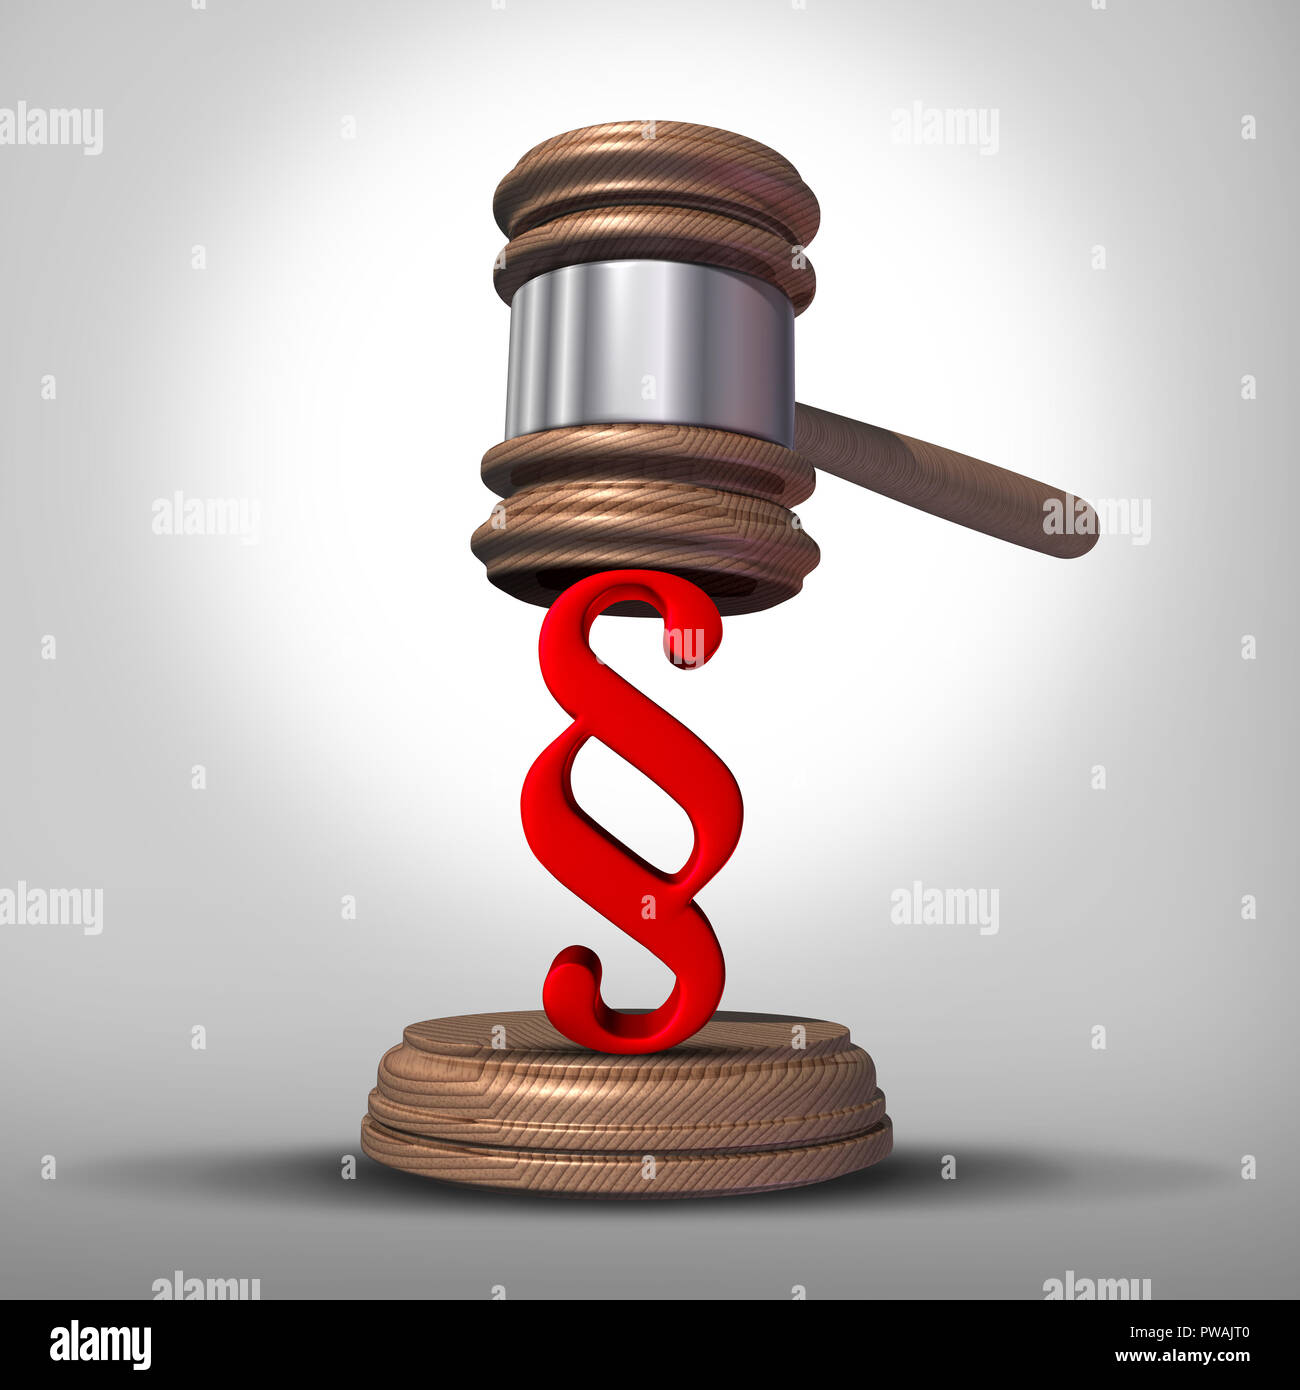 Law paragraph sign legal symbol as a judge gavel or justice mallet with an arbitration or legislation icon as a 3D render. Stock Photo